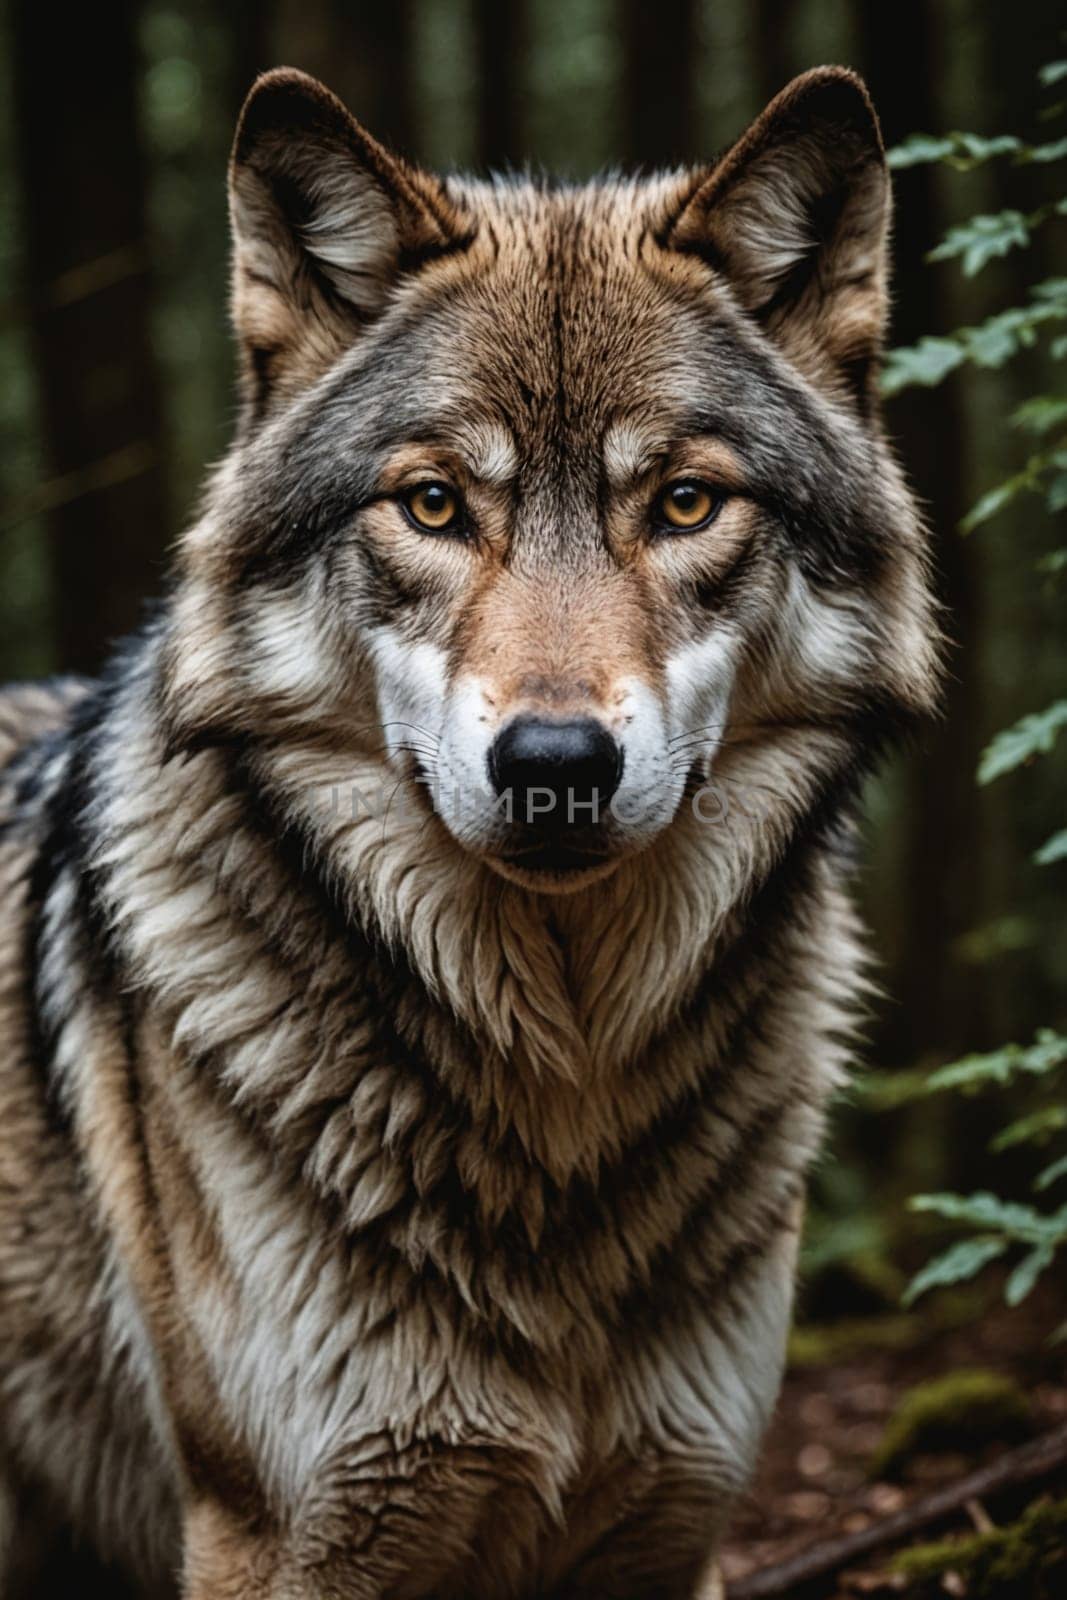 The penetrating gaze of a wolf through the camera lens highlights the essence of wilderness and predation.